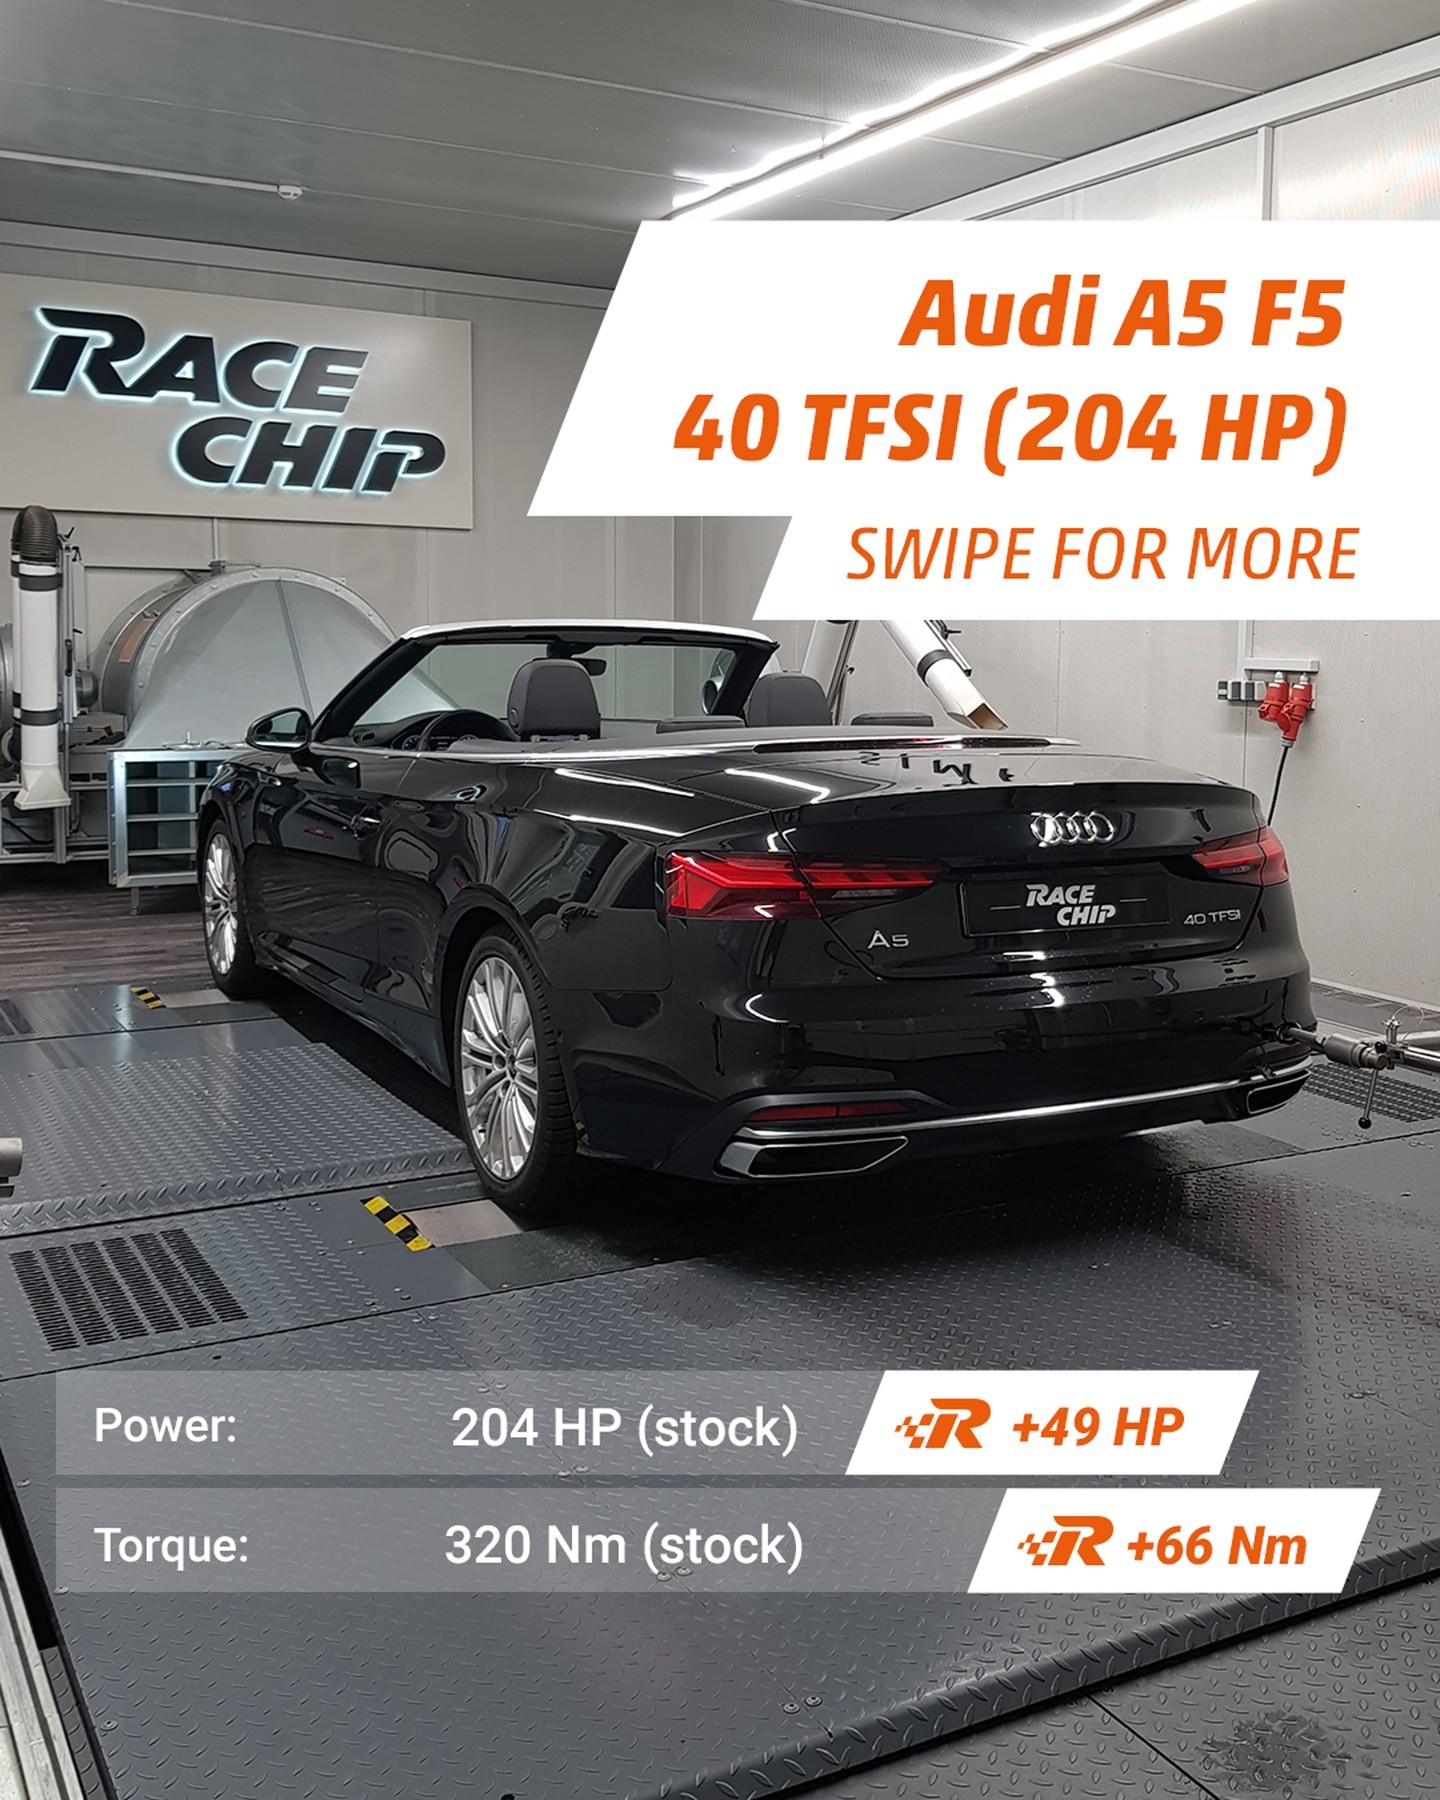 Chiptuning for Audi - Engine Tuning by RaceChip